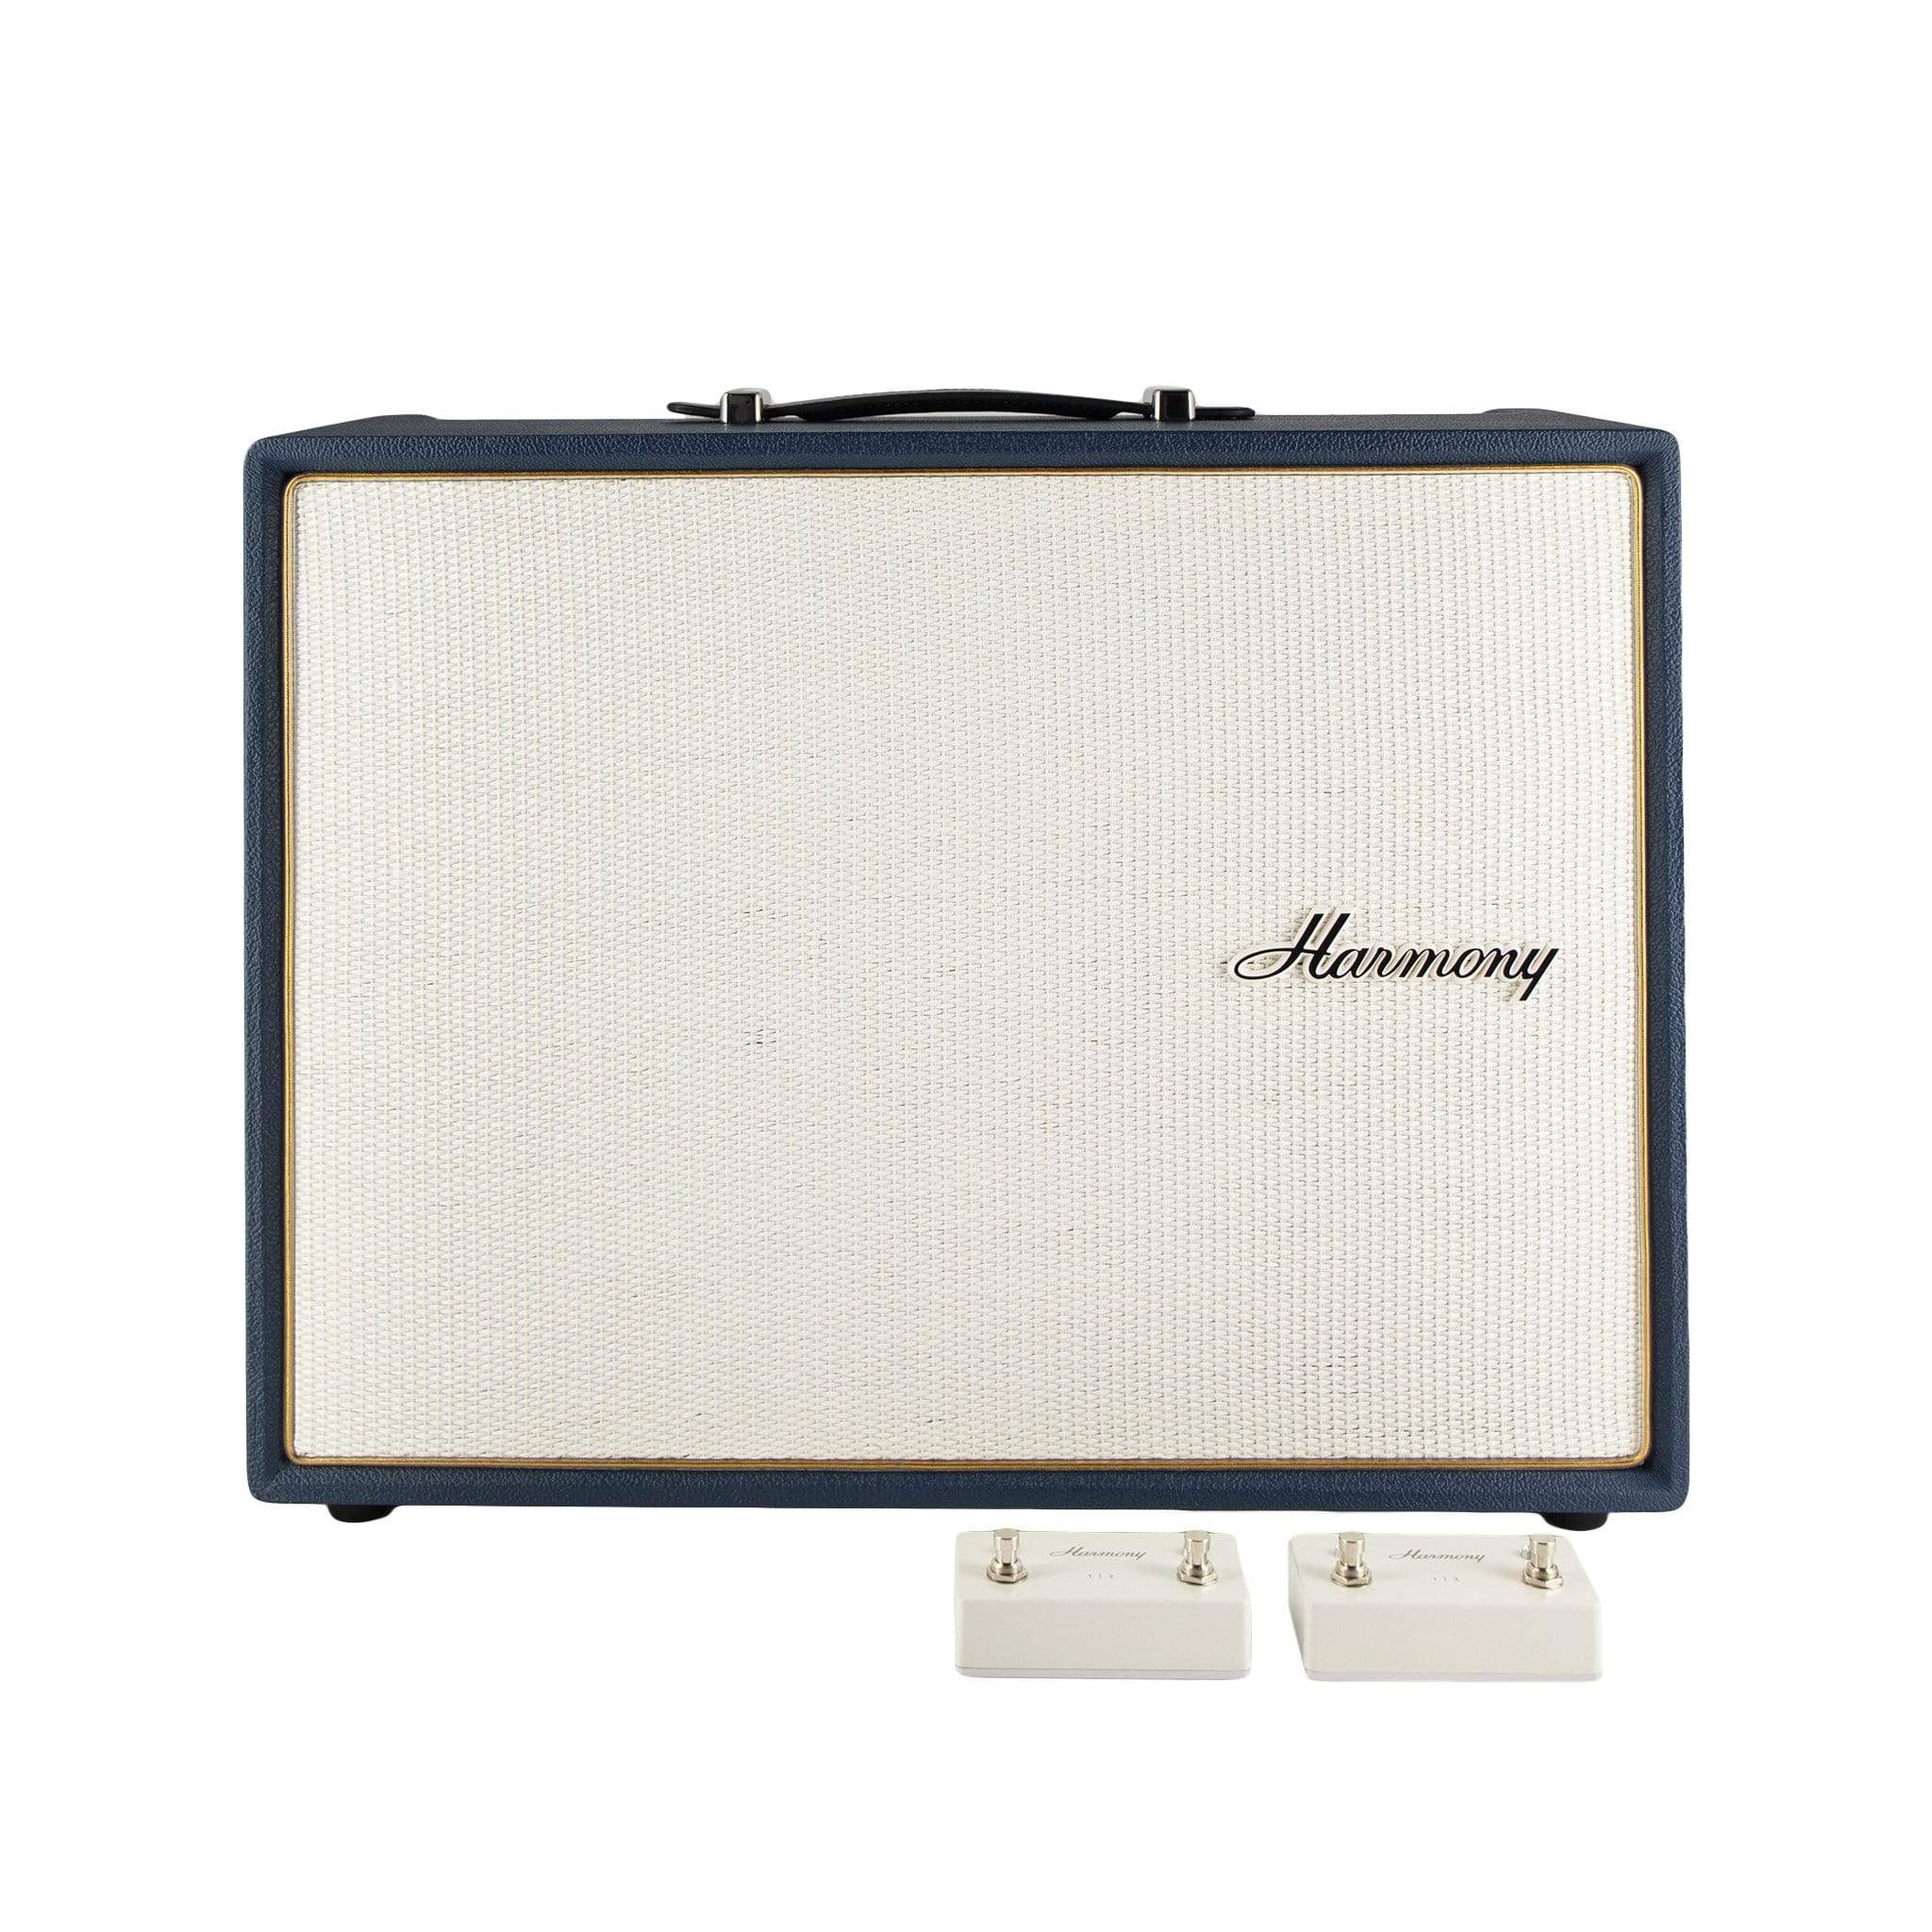 Harmony Series 6 H620 1x12 20W Combo Amp Amps / Guitar Combos